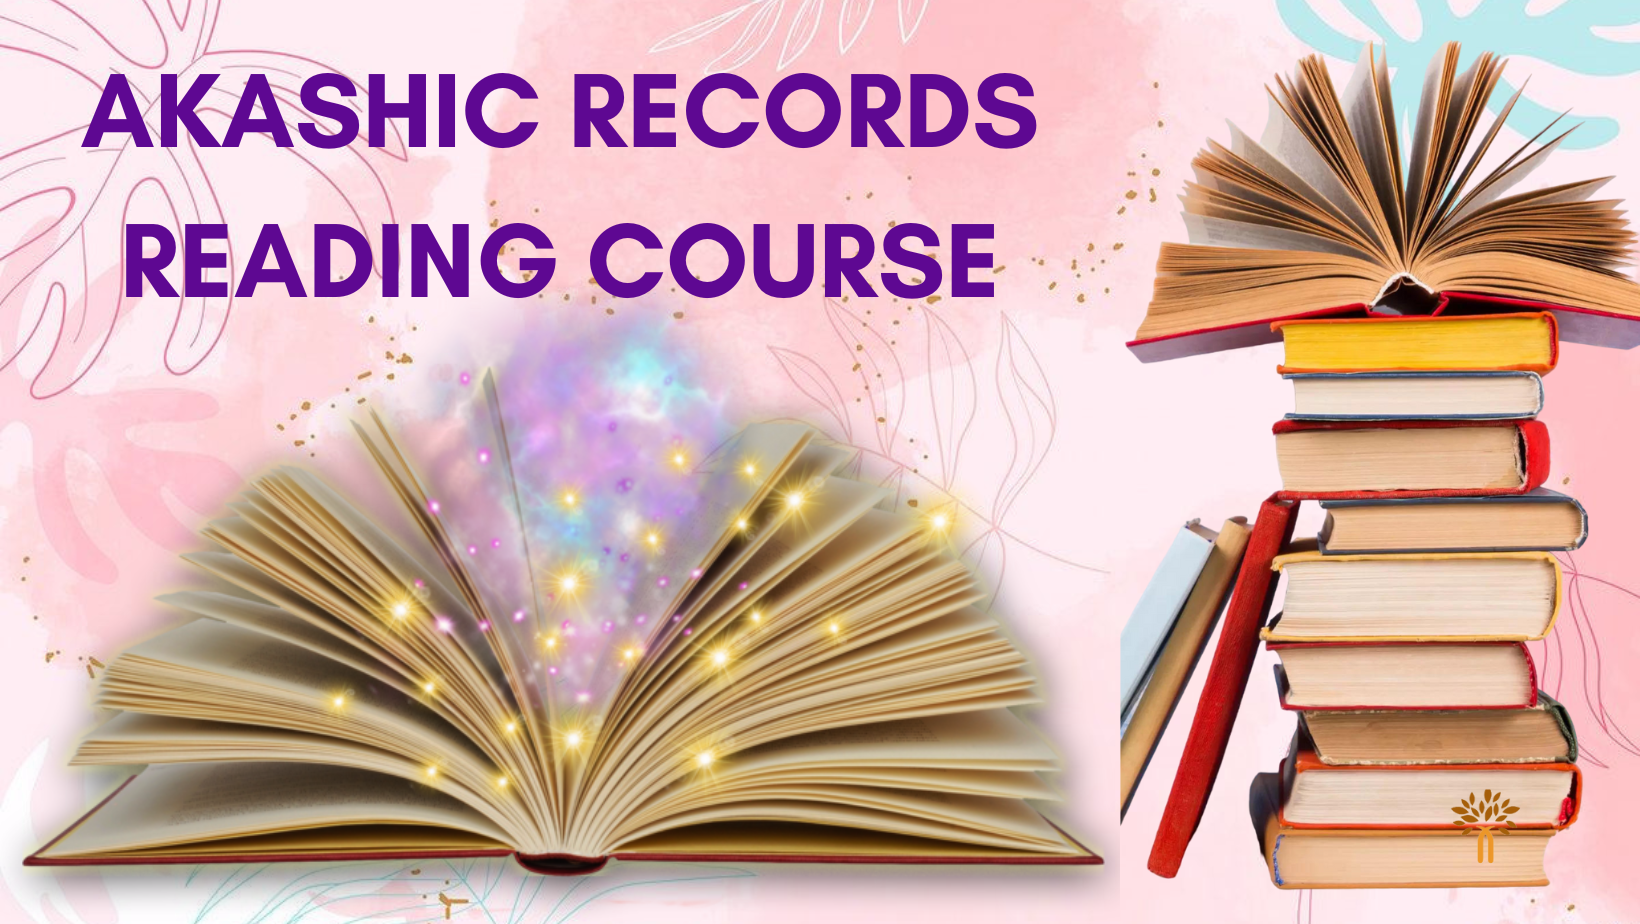 Akashic Records Reading Course in Pune